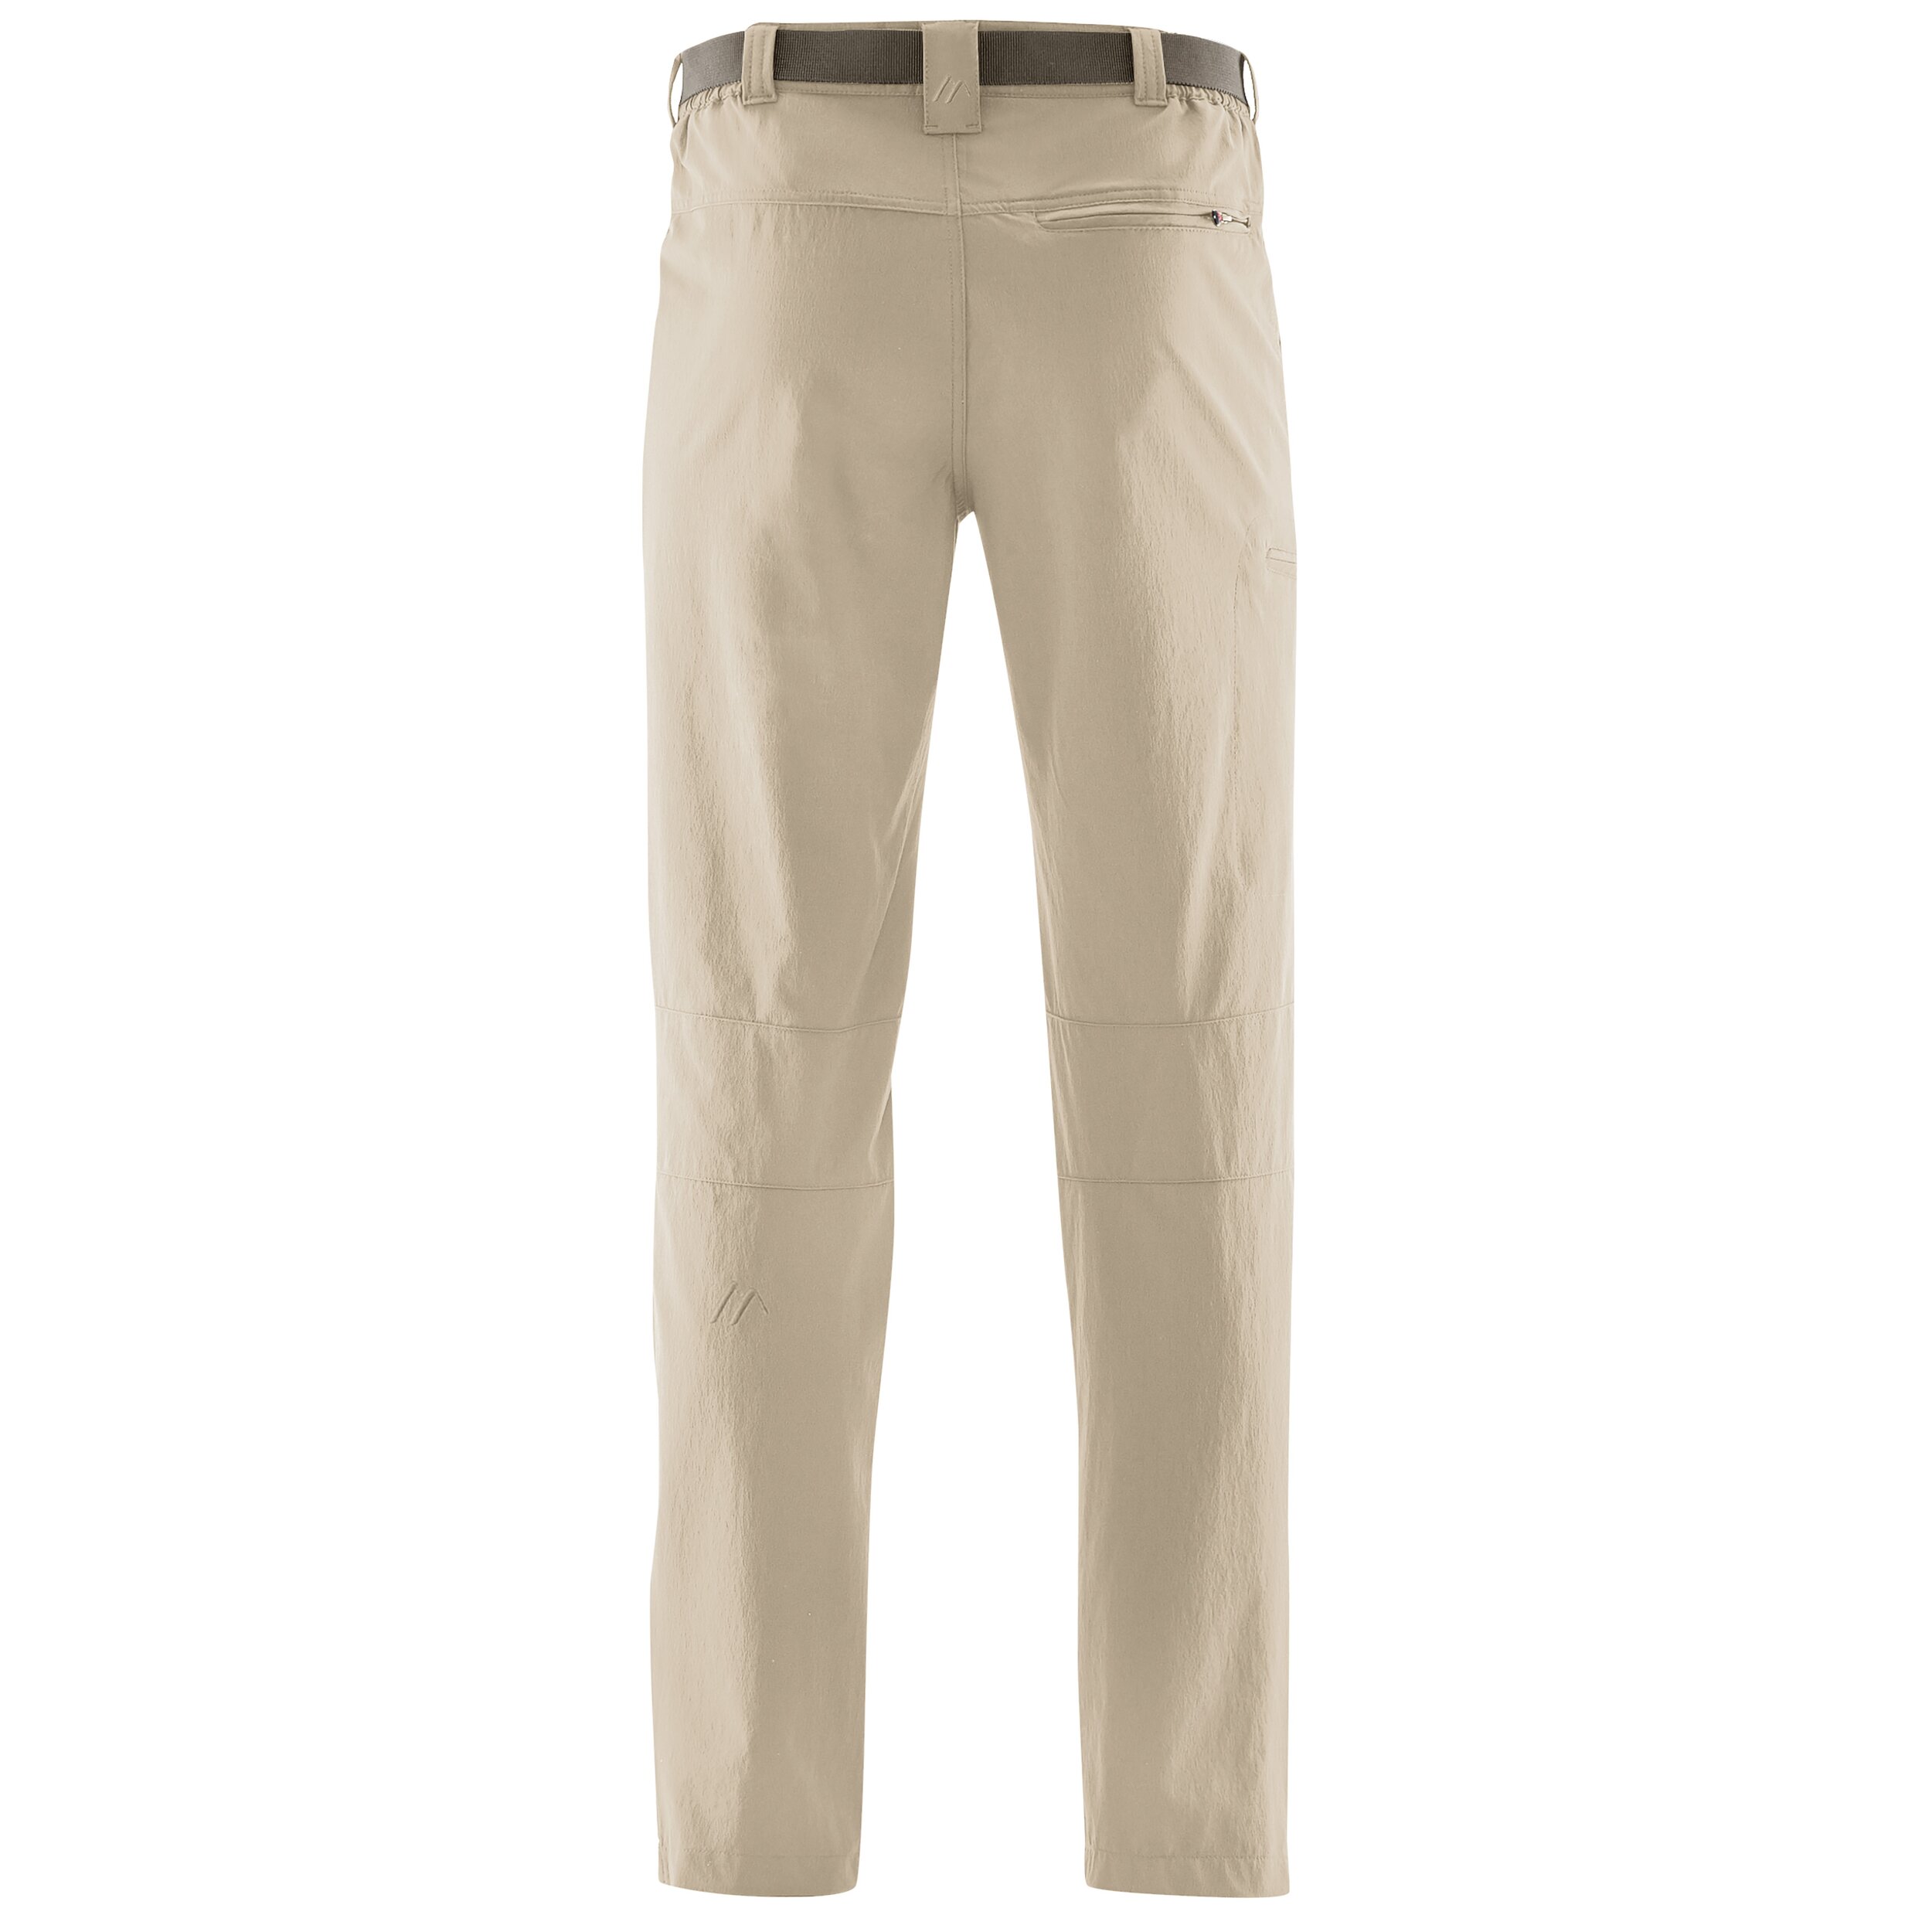 Maier Sports Torid slim | Outdoor pants | MaierSports